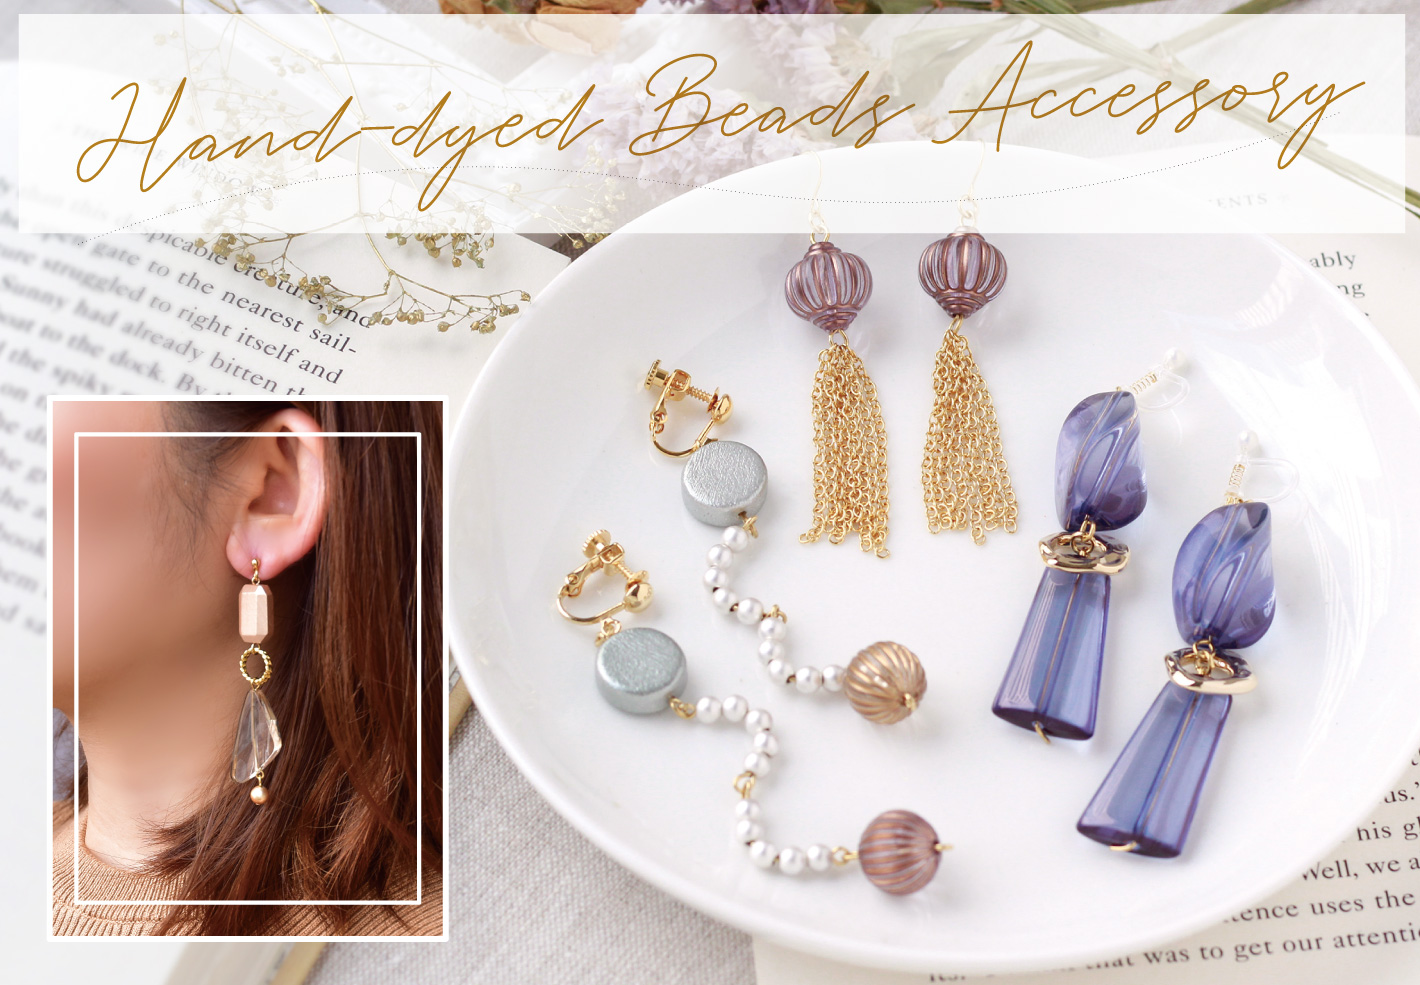 Hand-dyed bead accessories